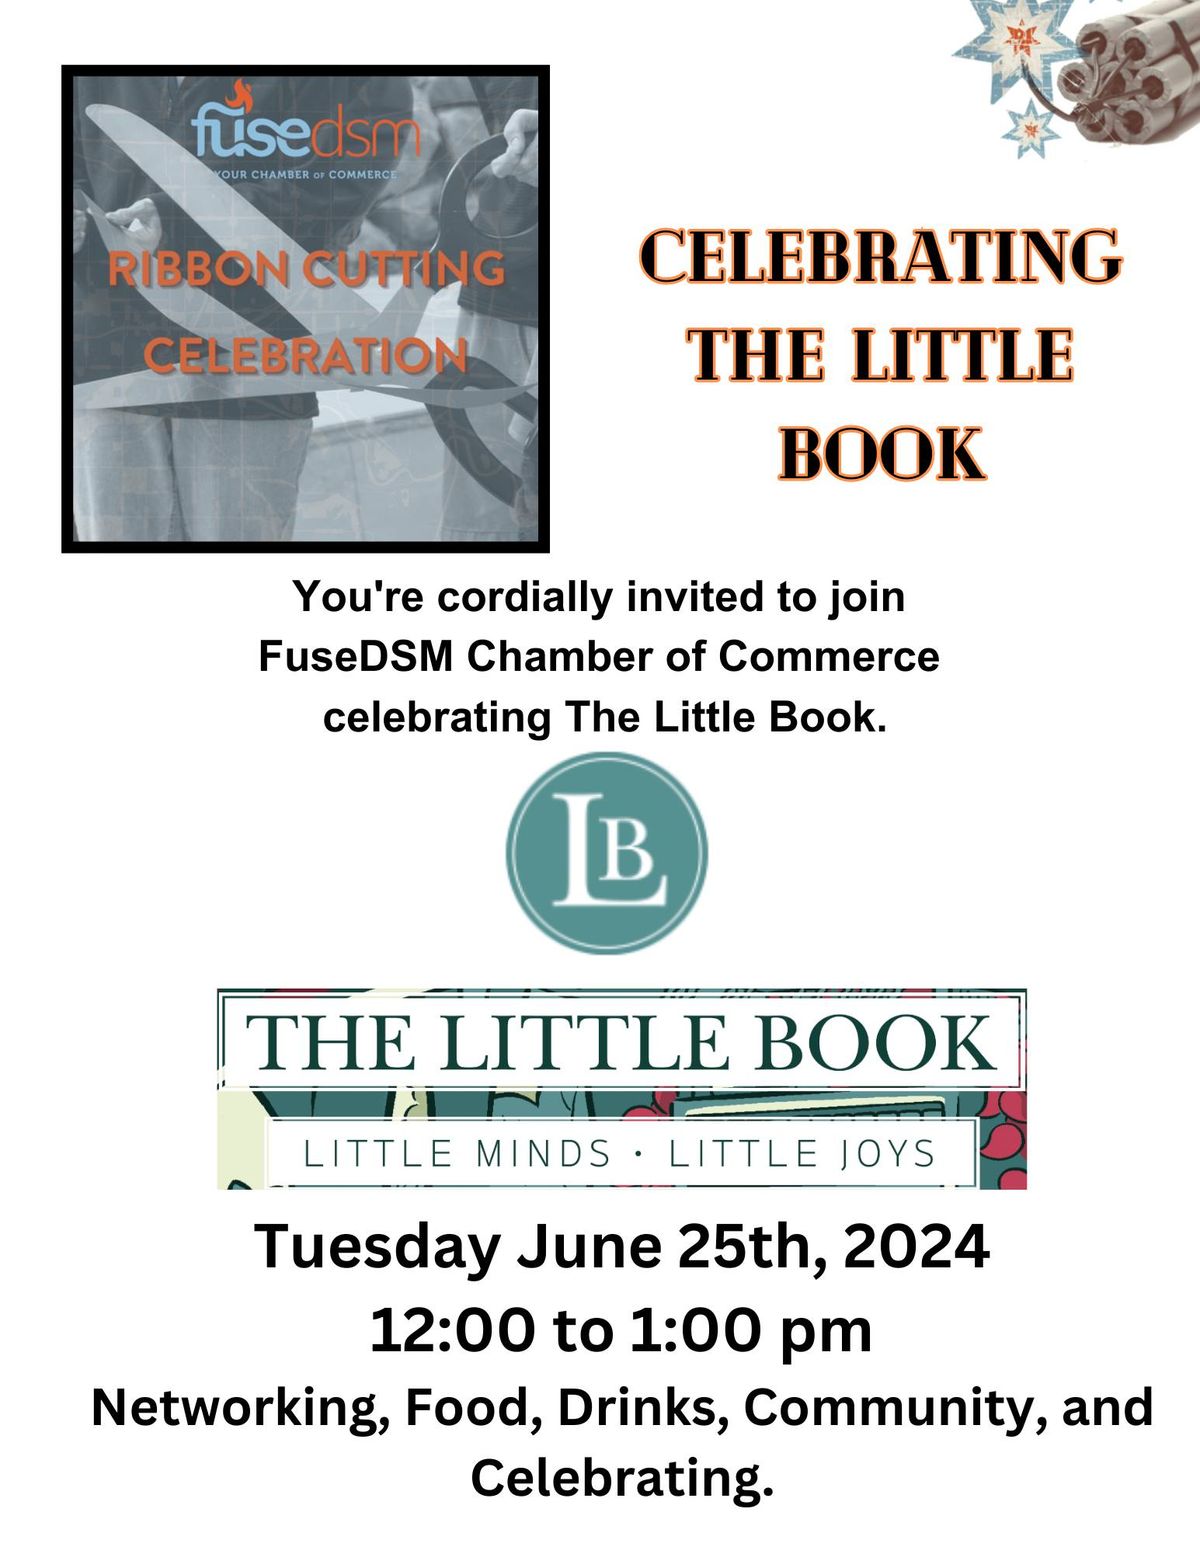 FuseDSM Ribbon Cutting Celebration for The Little Book